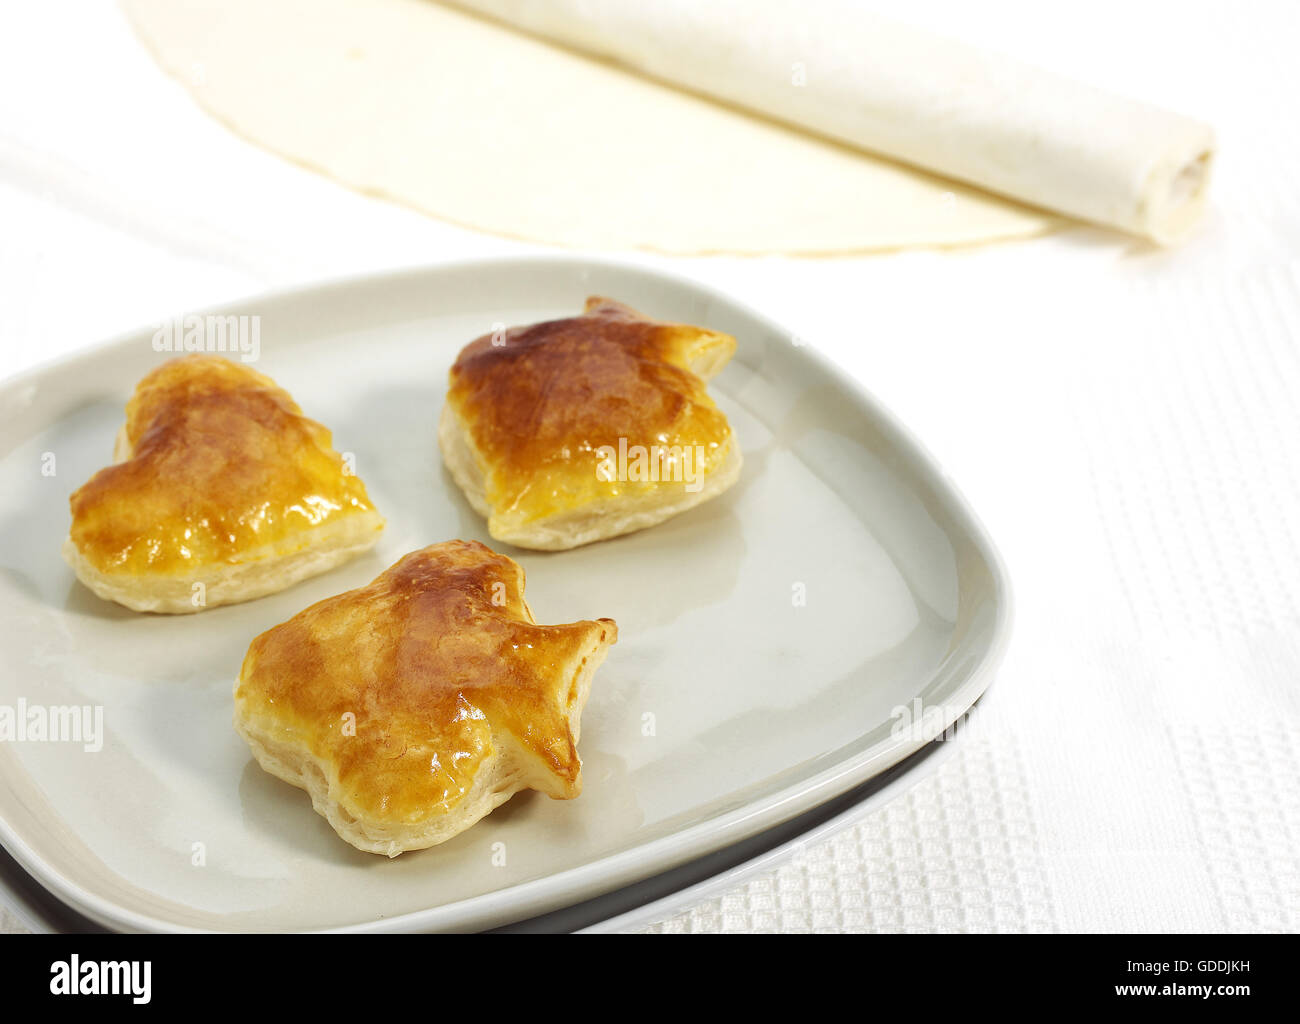 Crackers made with Puff or Flaky Pastry against White Background Stock Photo